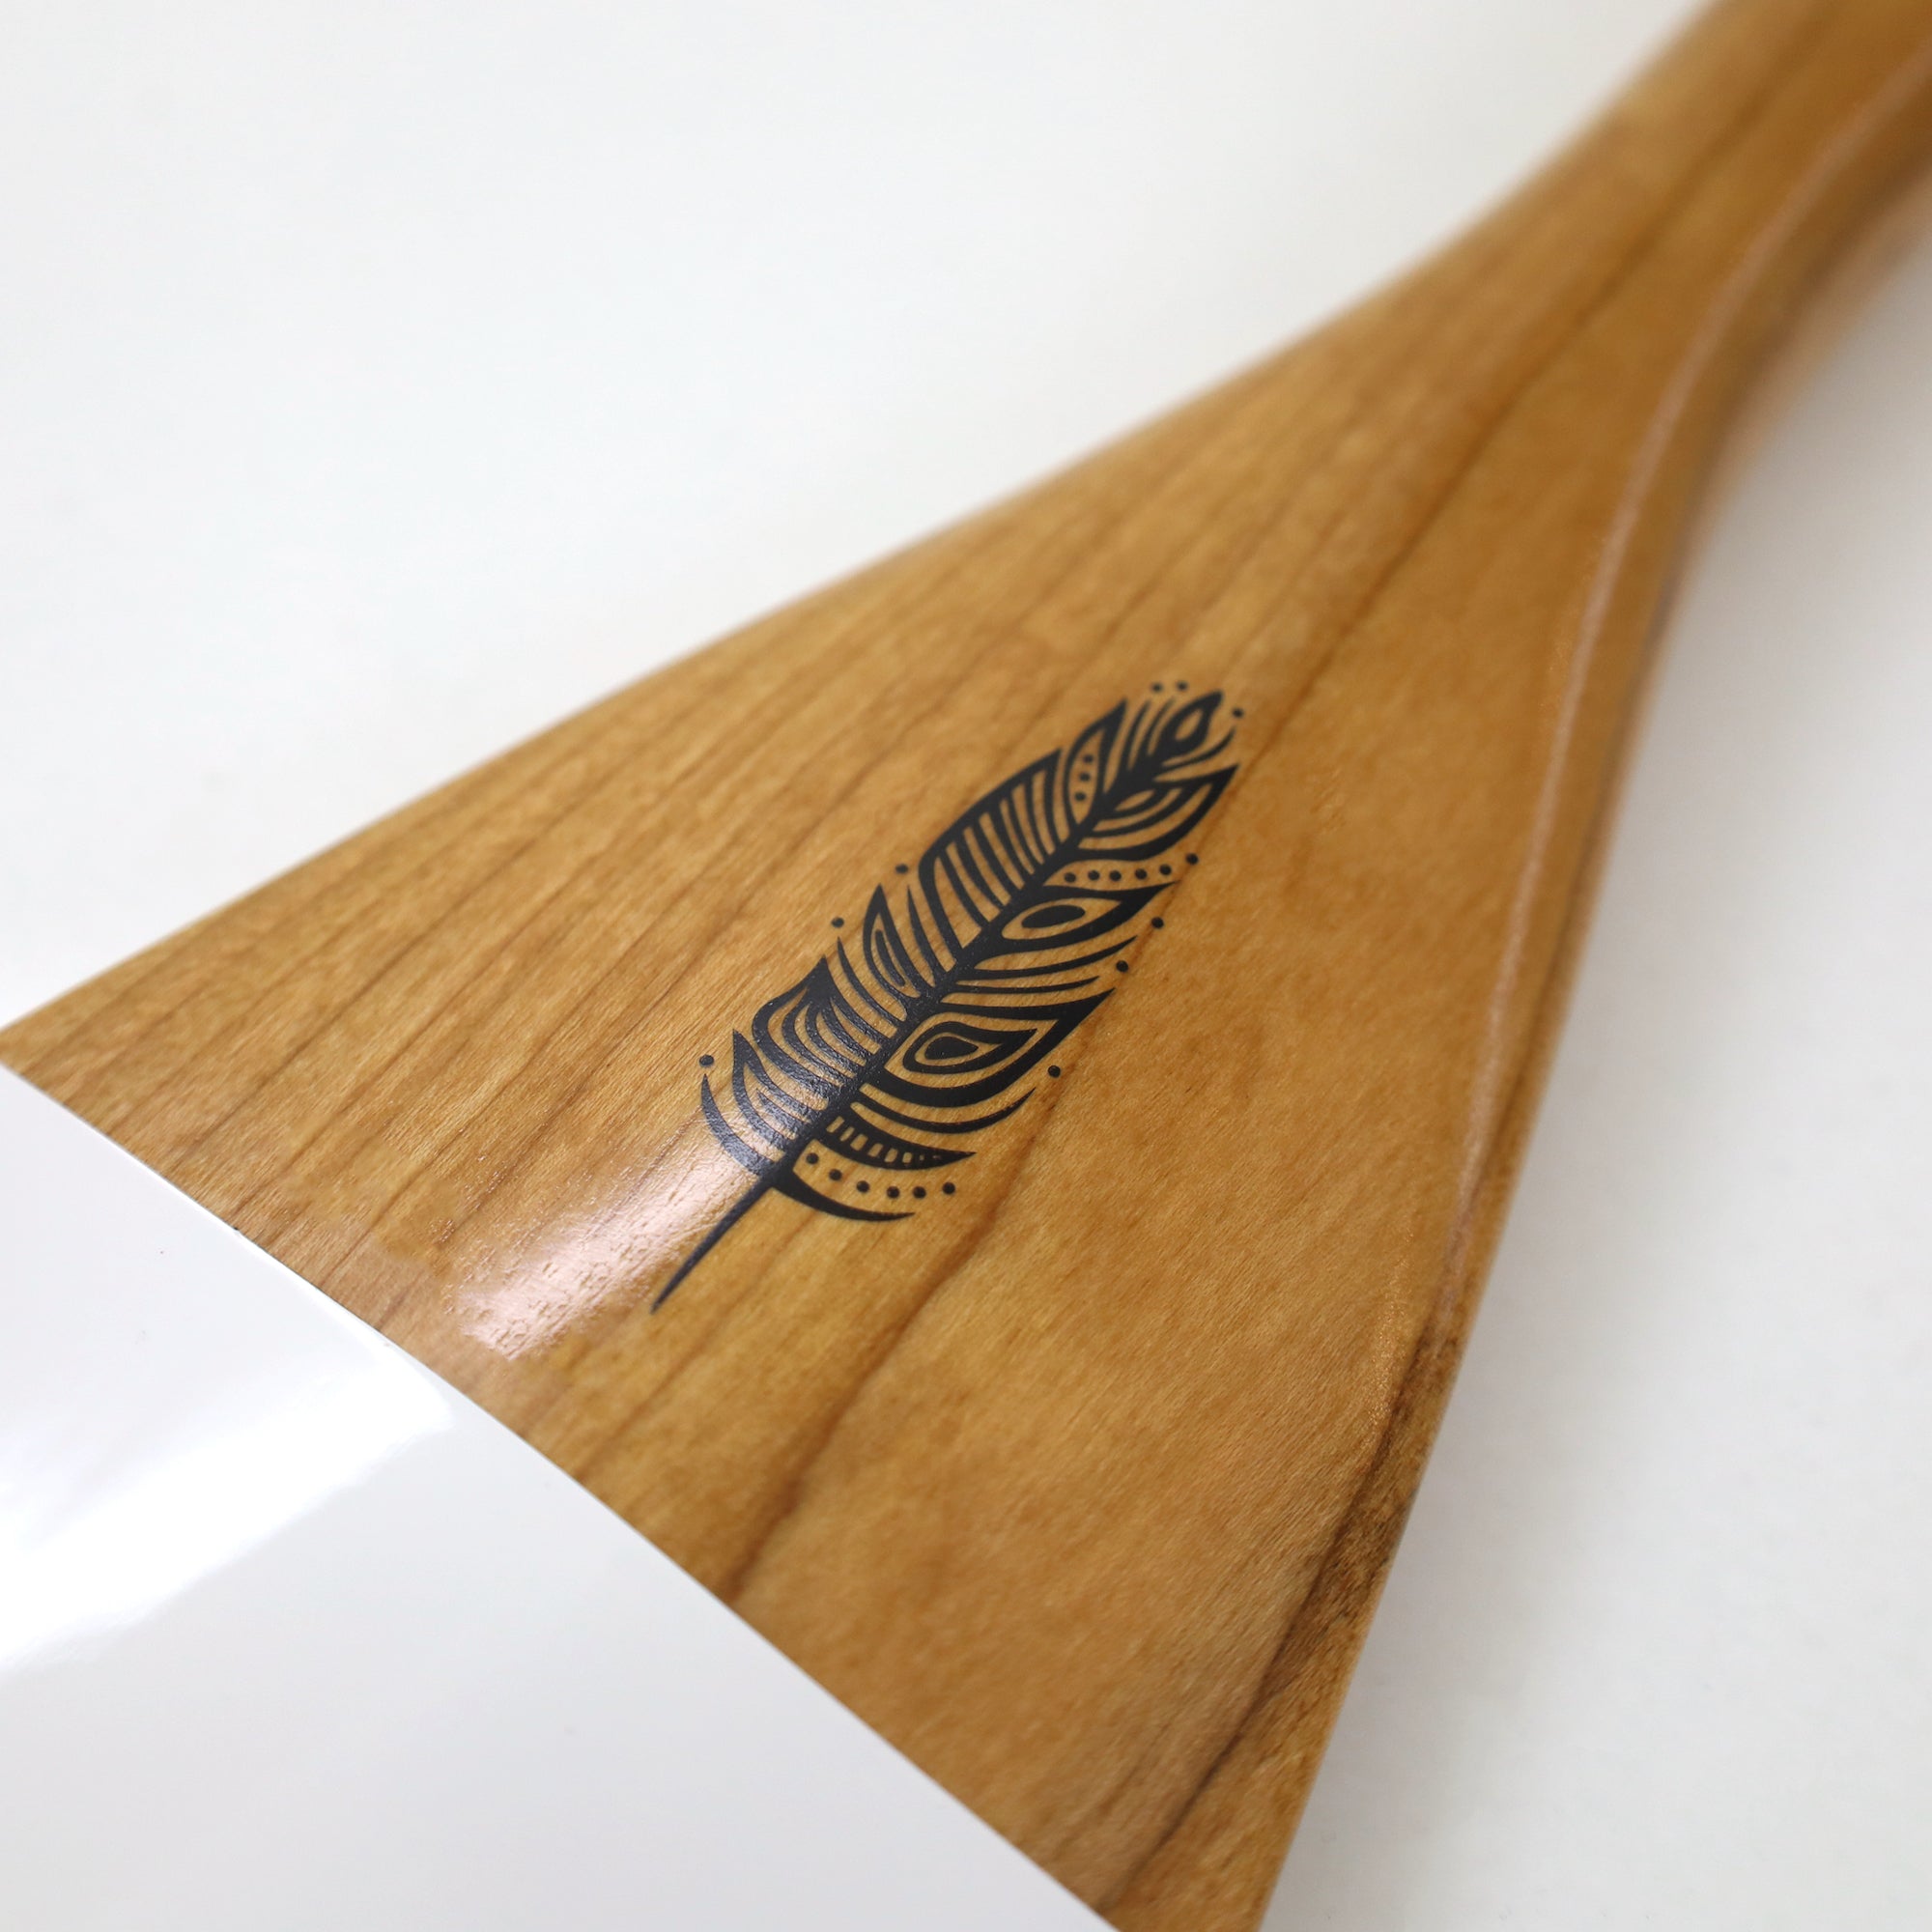 Patrick Hunter - Turtle Limited Edition Paddle